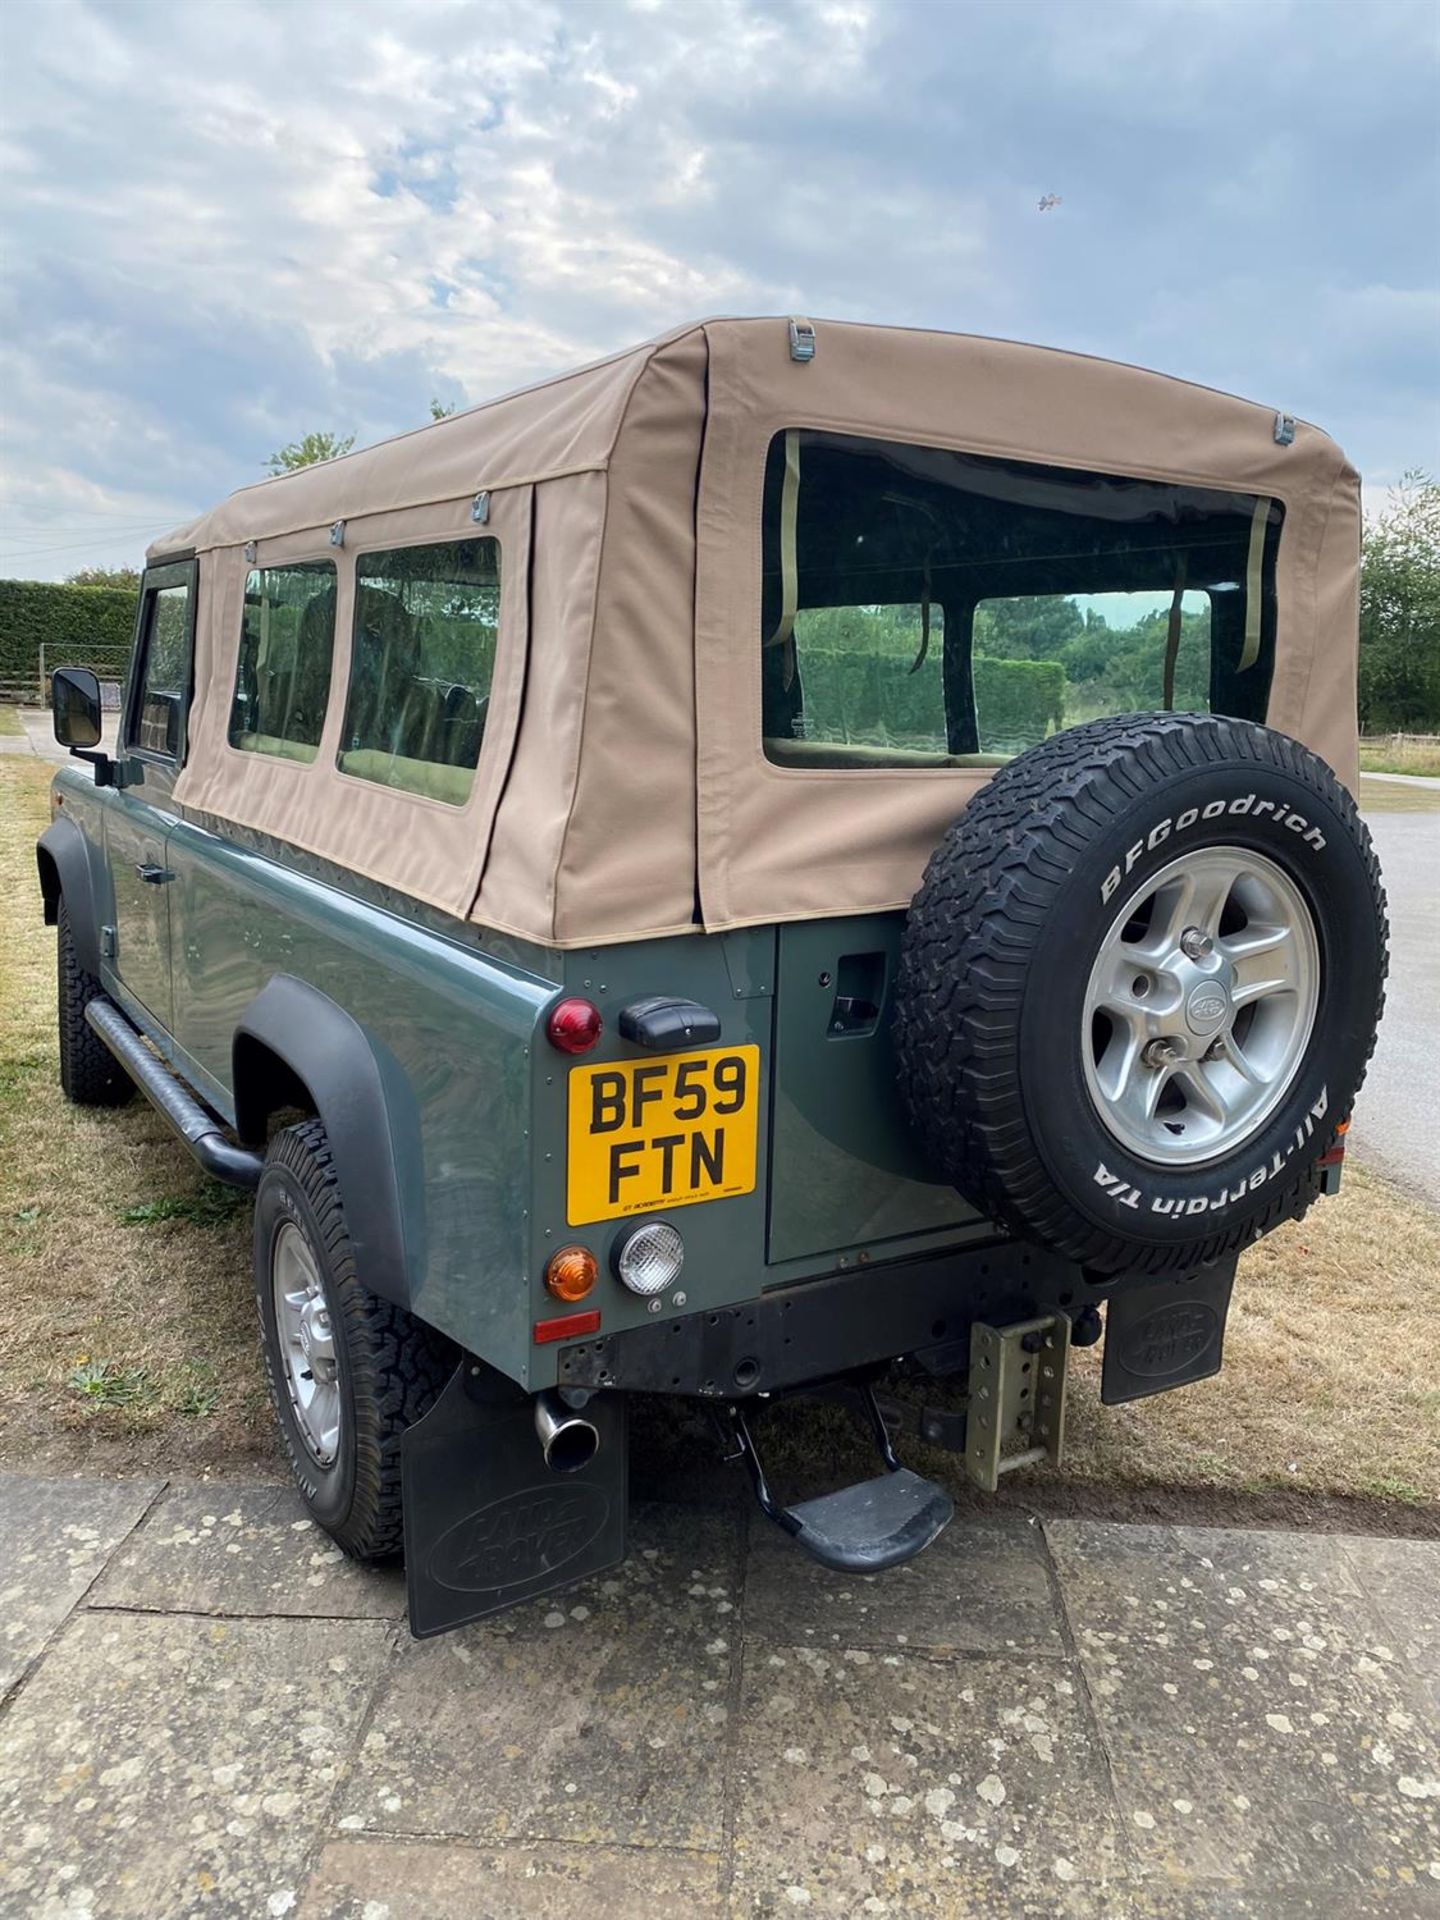 2009 Land Rover Defender 110 - Soft Top Conversion - Image 4 of 10